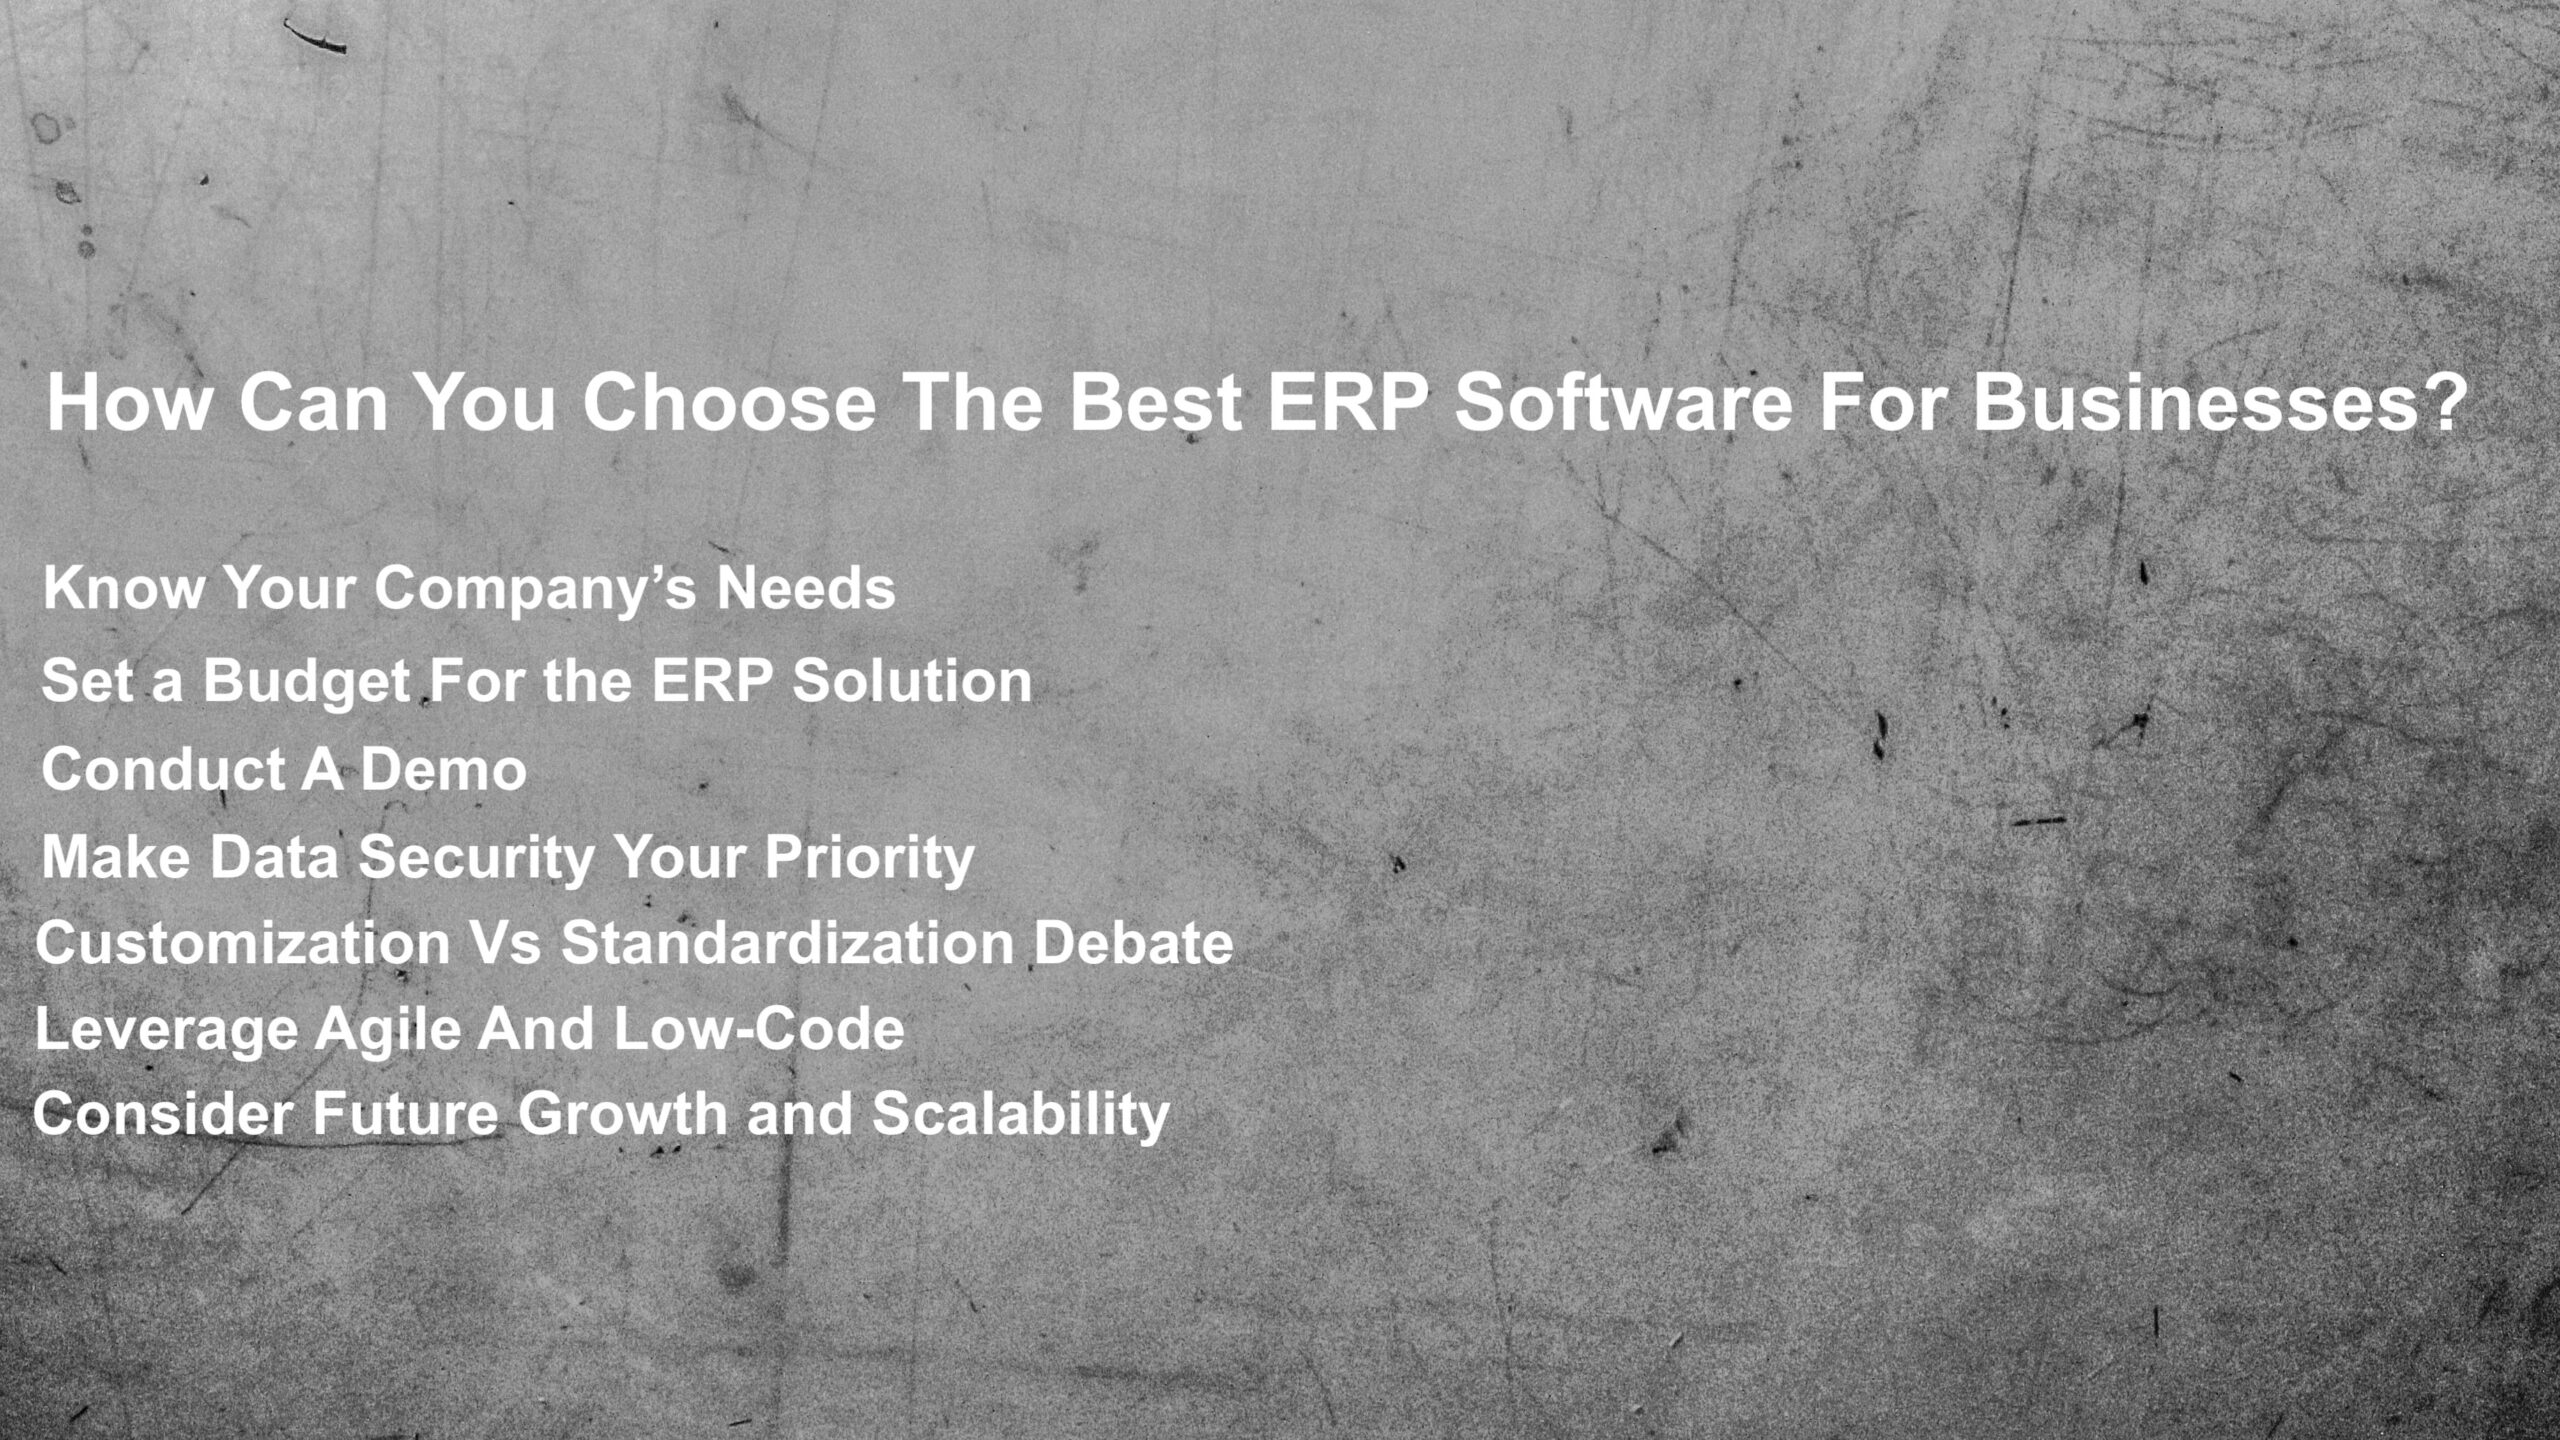 Steps to Choose Best ERP Software